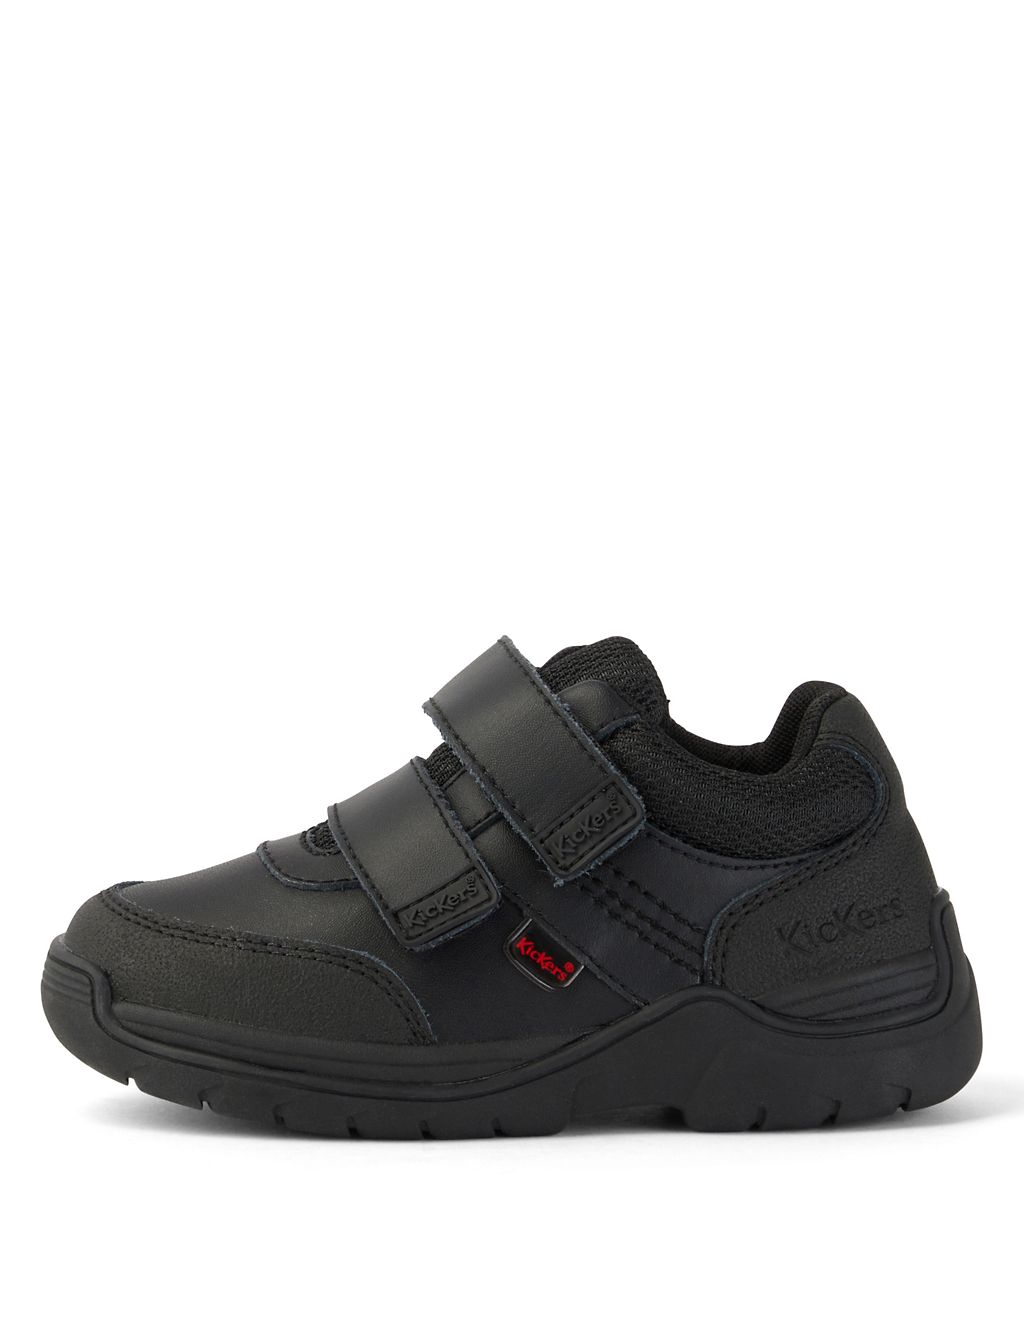 Kids' Leather Riptape School Shoes 3 of 6